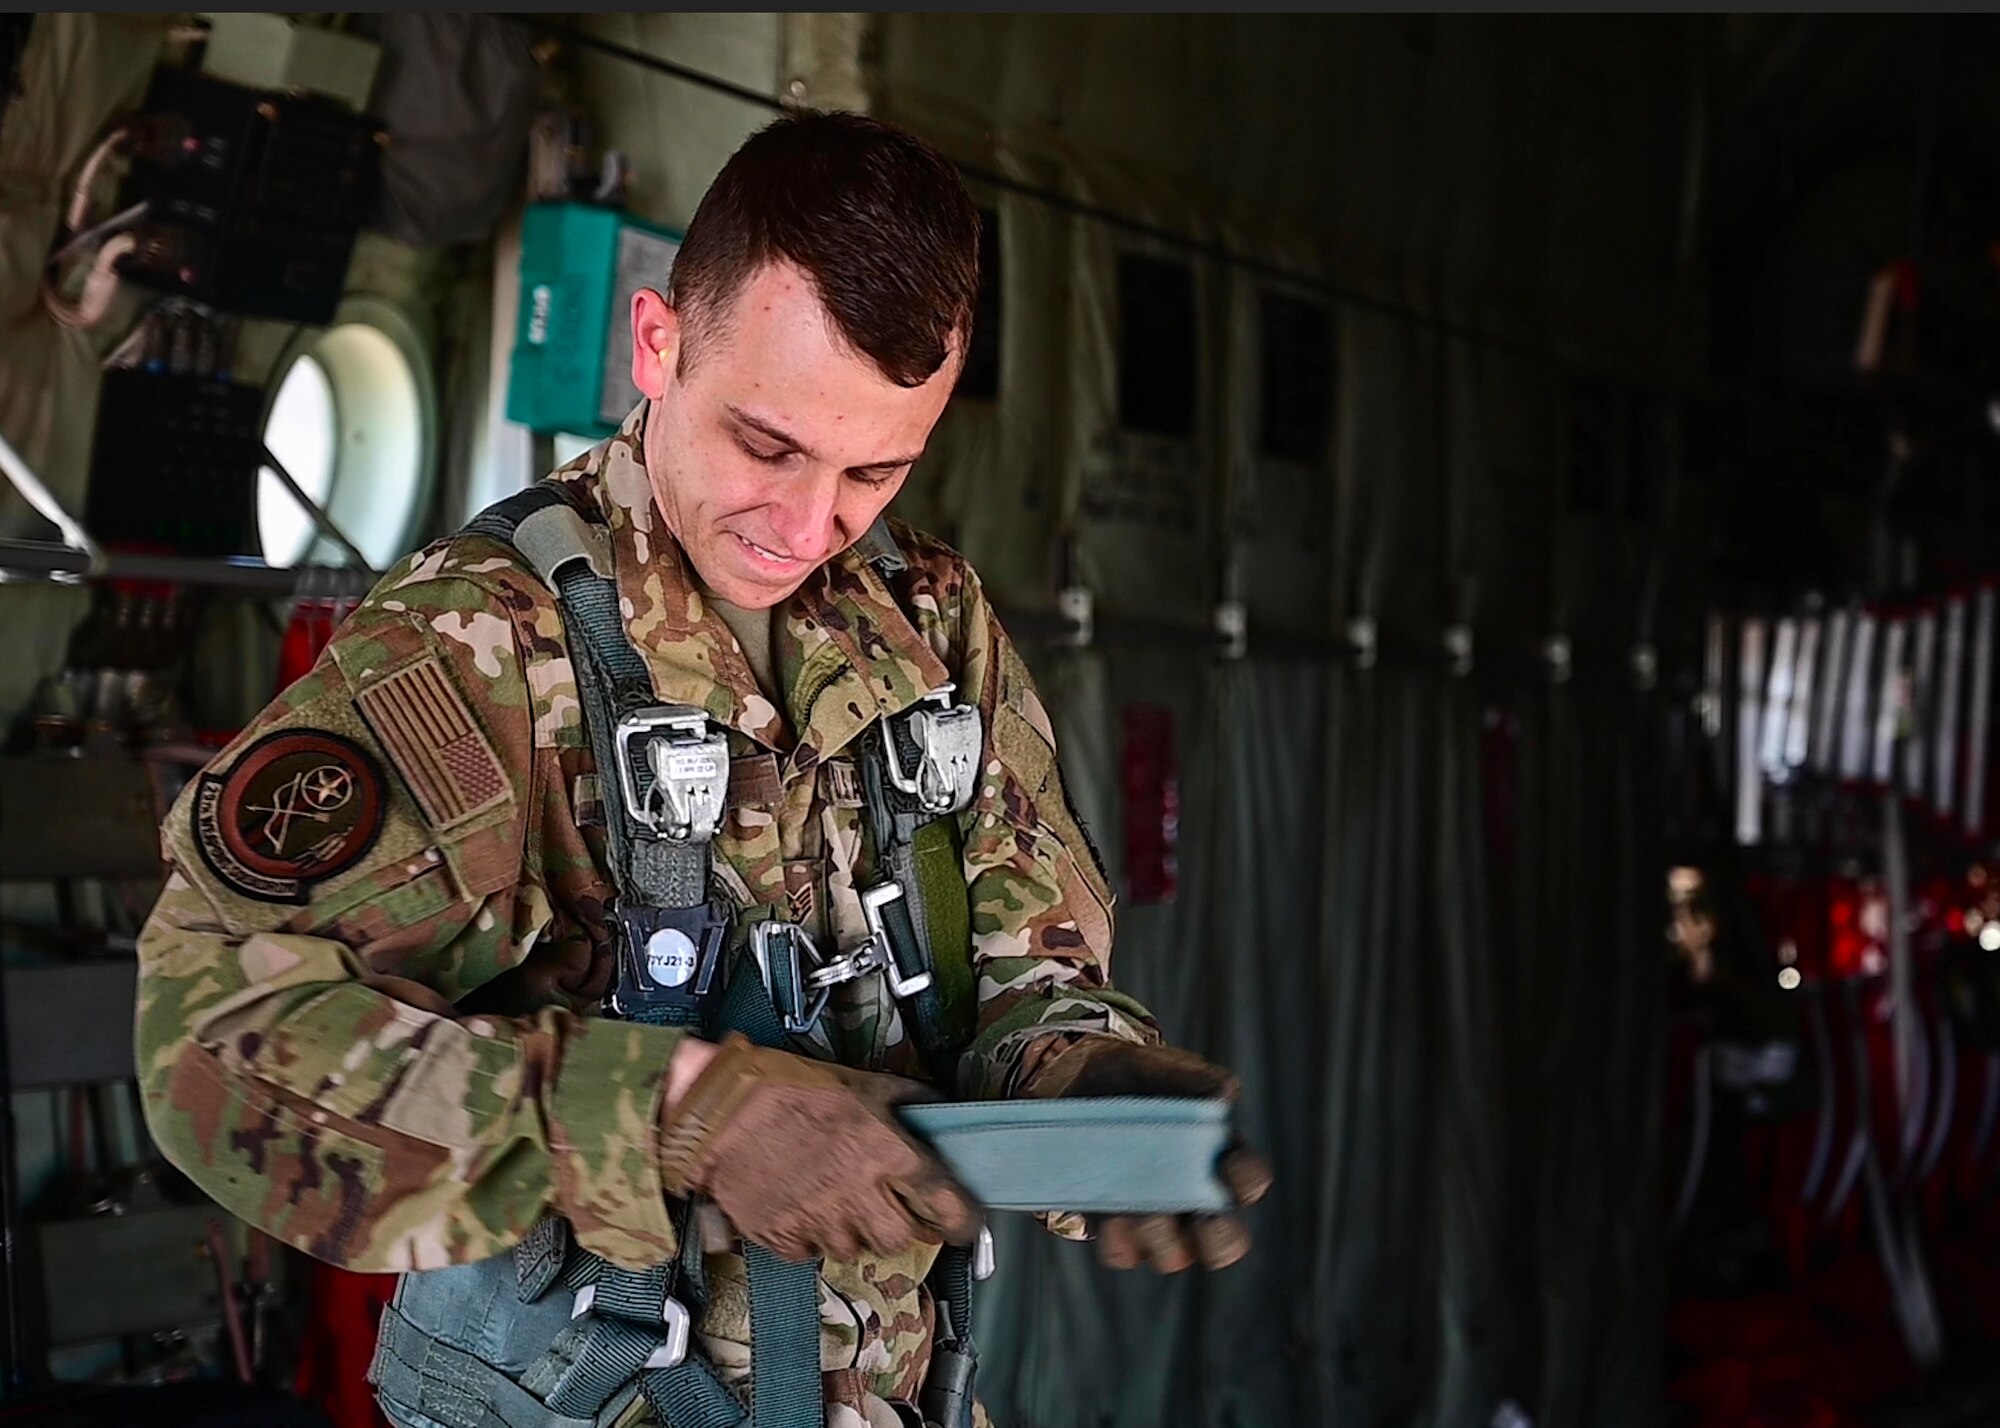 A loadmaster from the 29th Weapons Squadron prepares for a flight